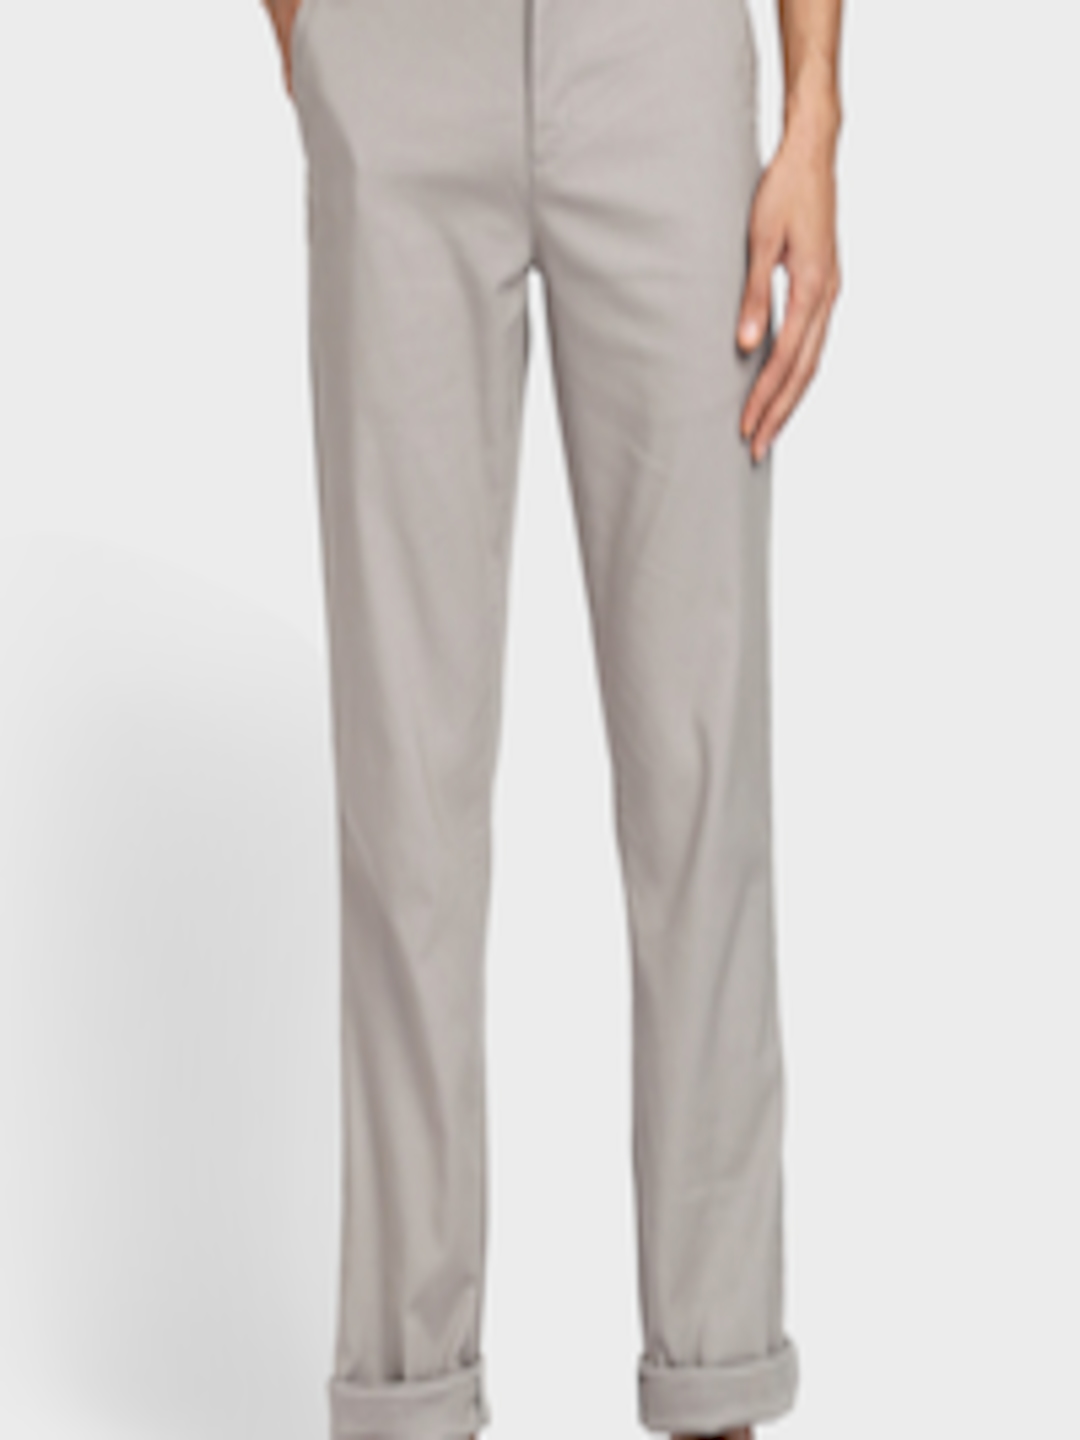 Buy ColorPlus Men Grey Chinos Trousers - Trousers for Men 17454996 | Myntra